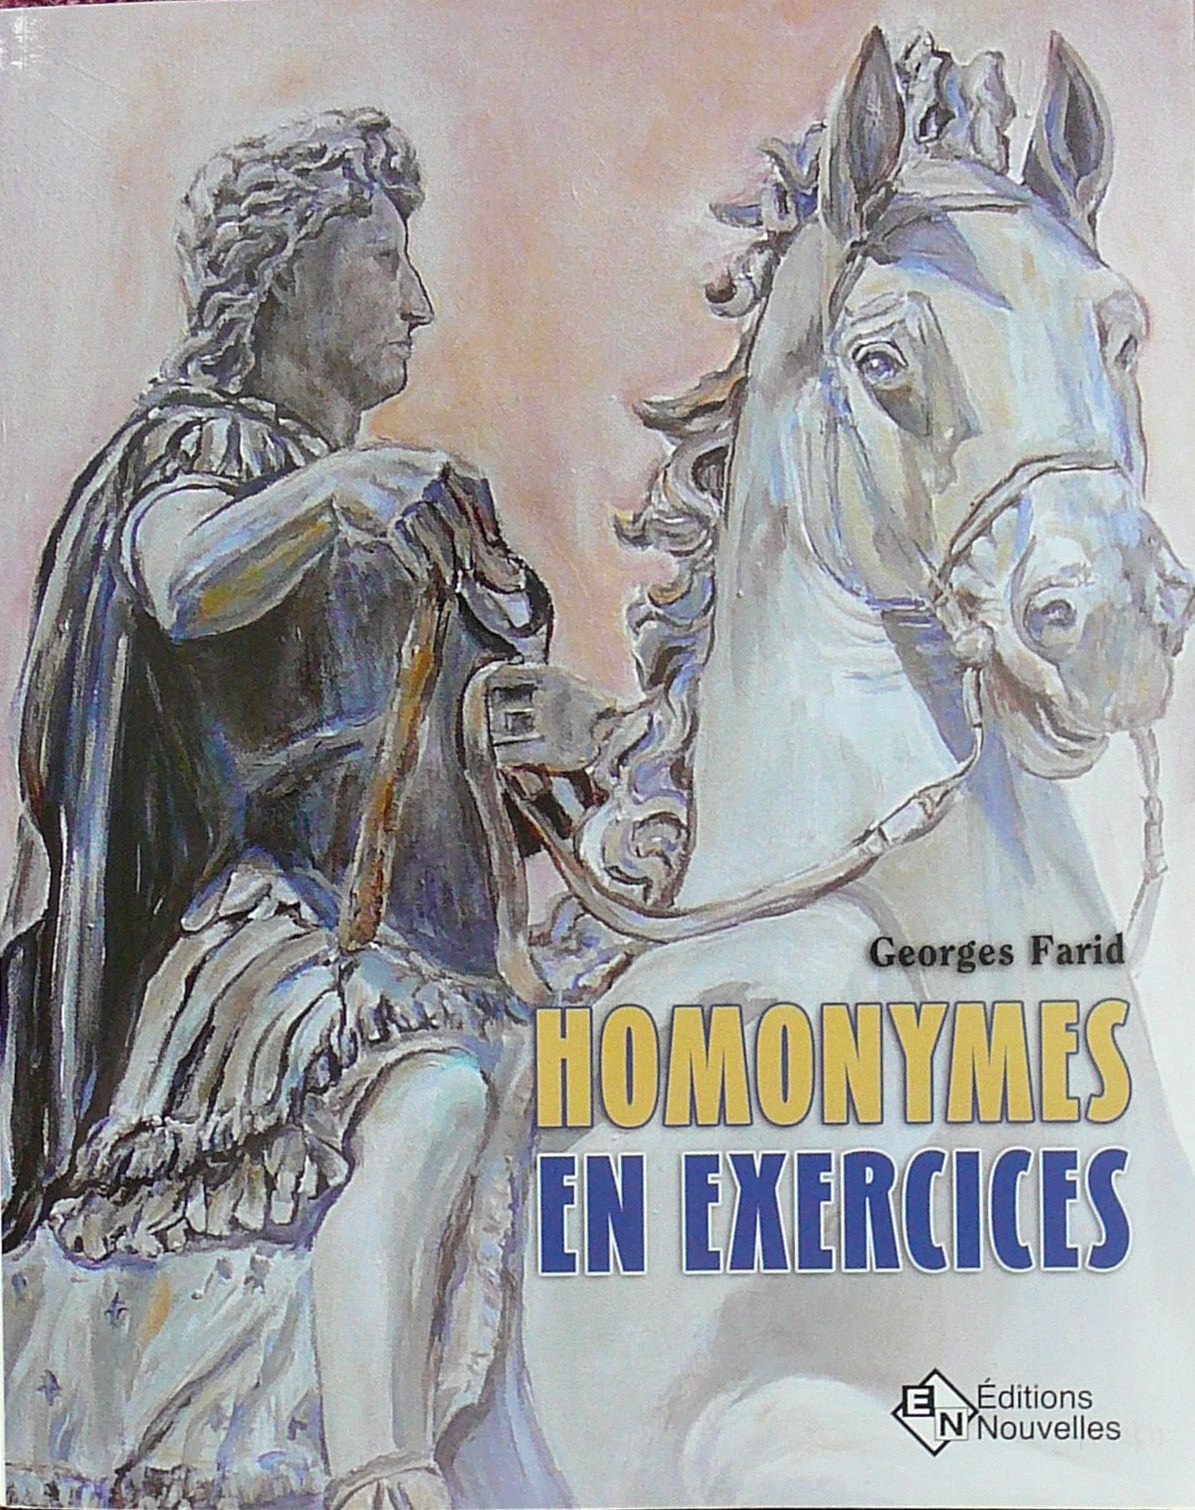 Georges Farid. Homonymes en exercices.